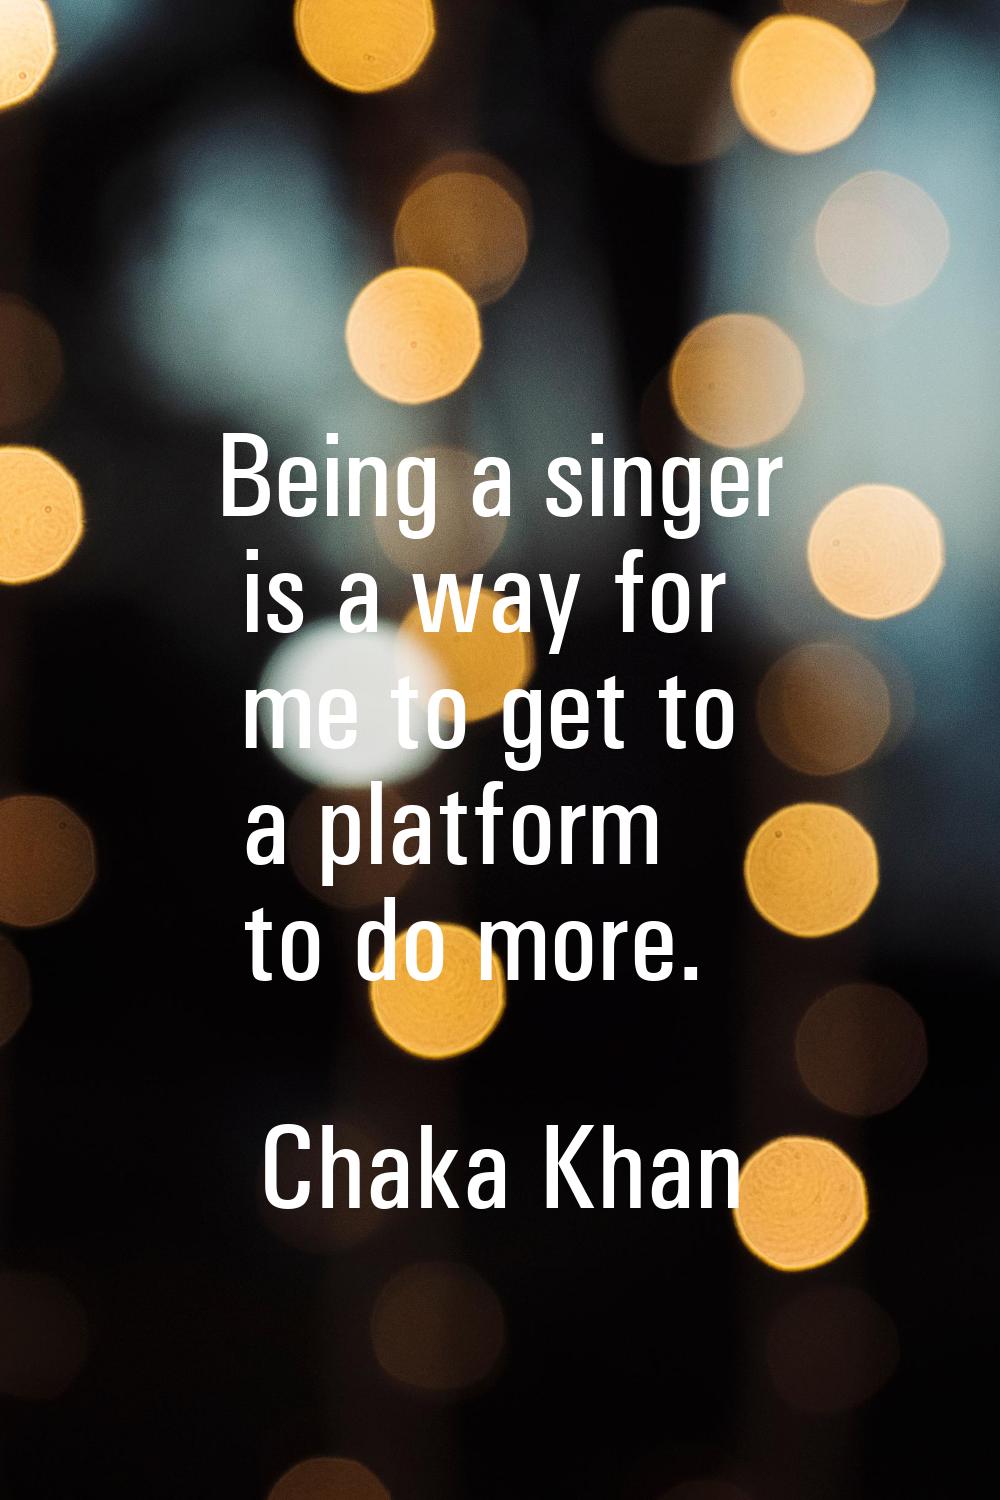 Being a singer is a way for me to get to a platform to do more.